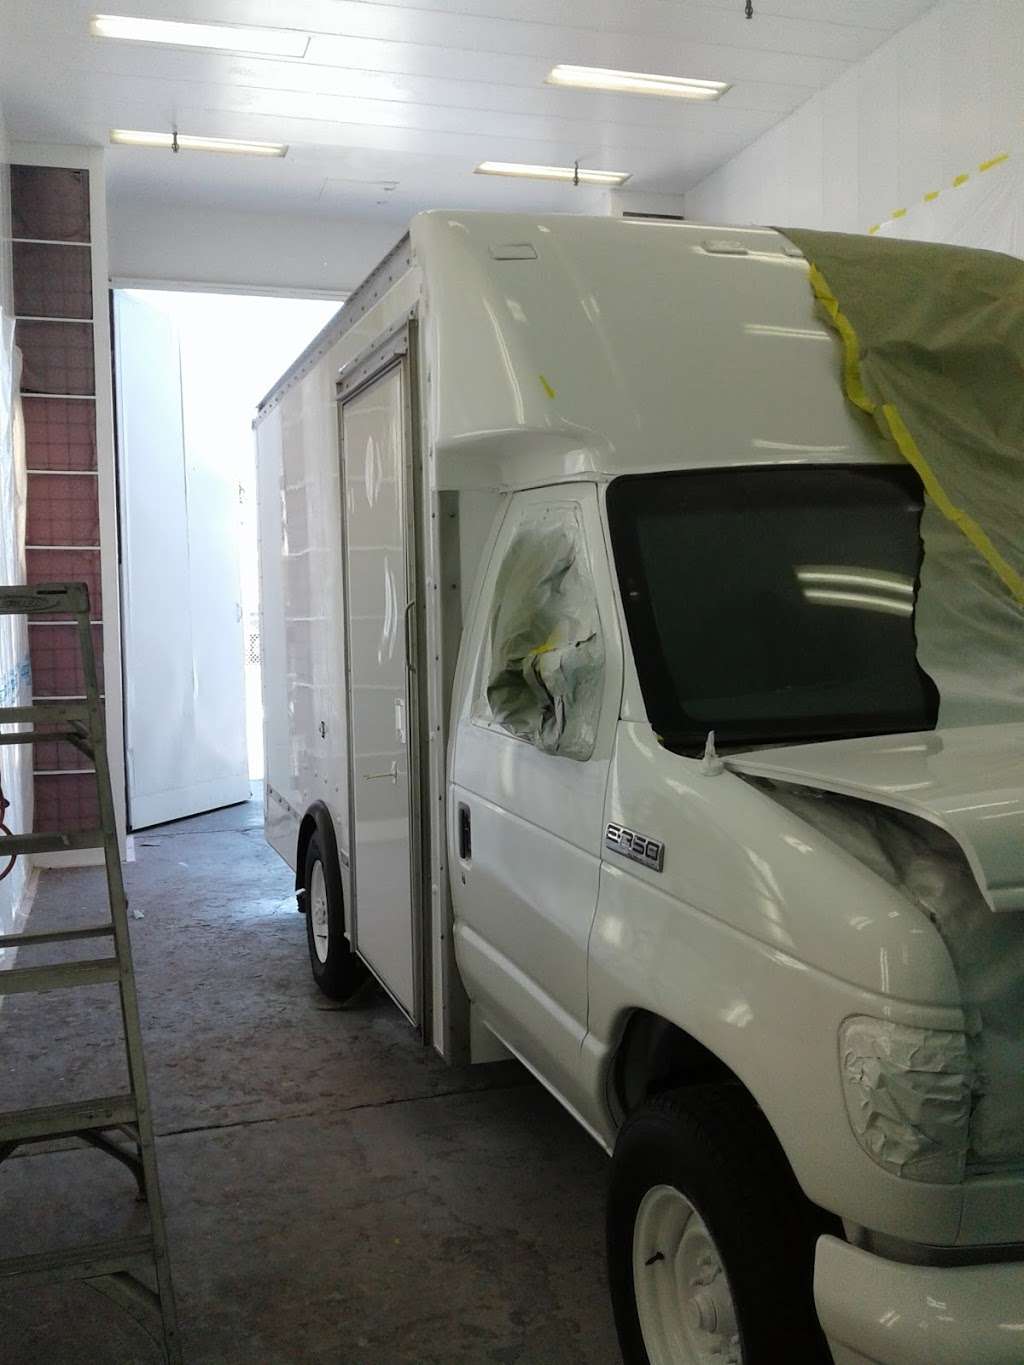 OEM Auto Paint & Spray Booth Rentals | 4200 E Olympic Blvd, Los Angeles, CA 90023 | Phone: (323) 406-2508